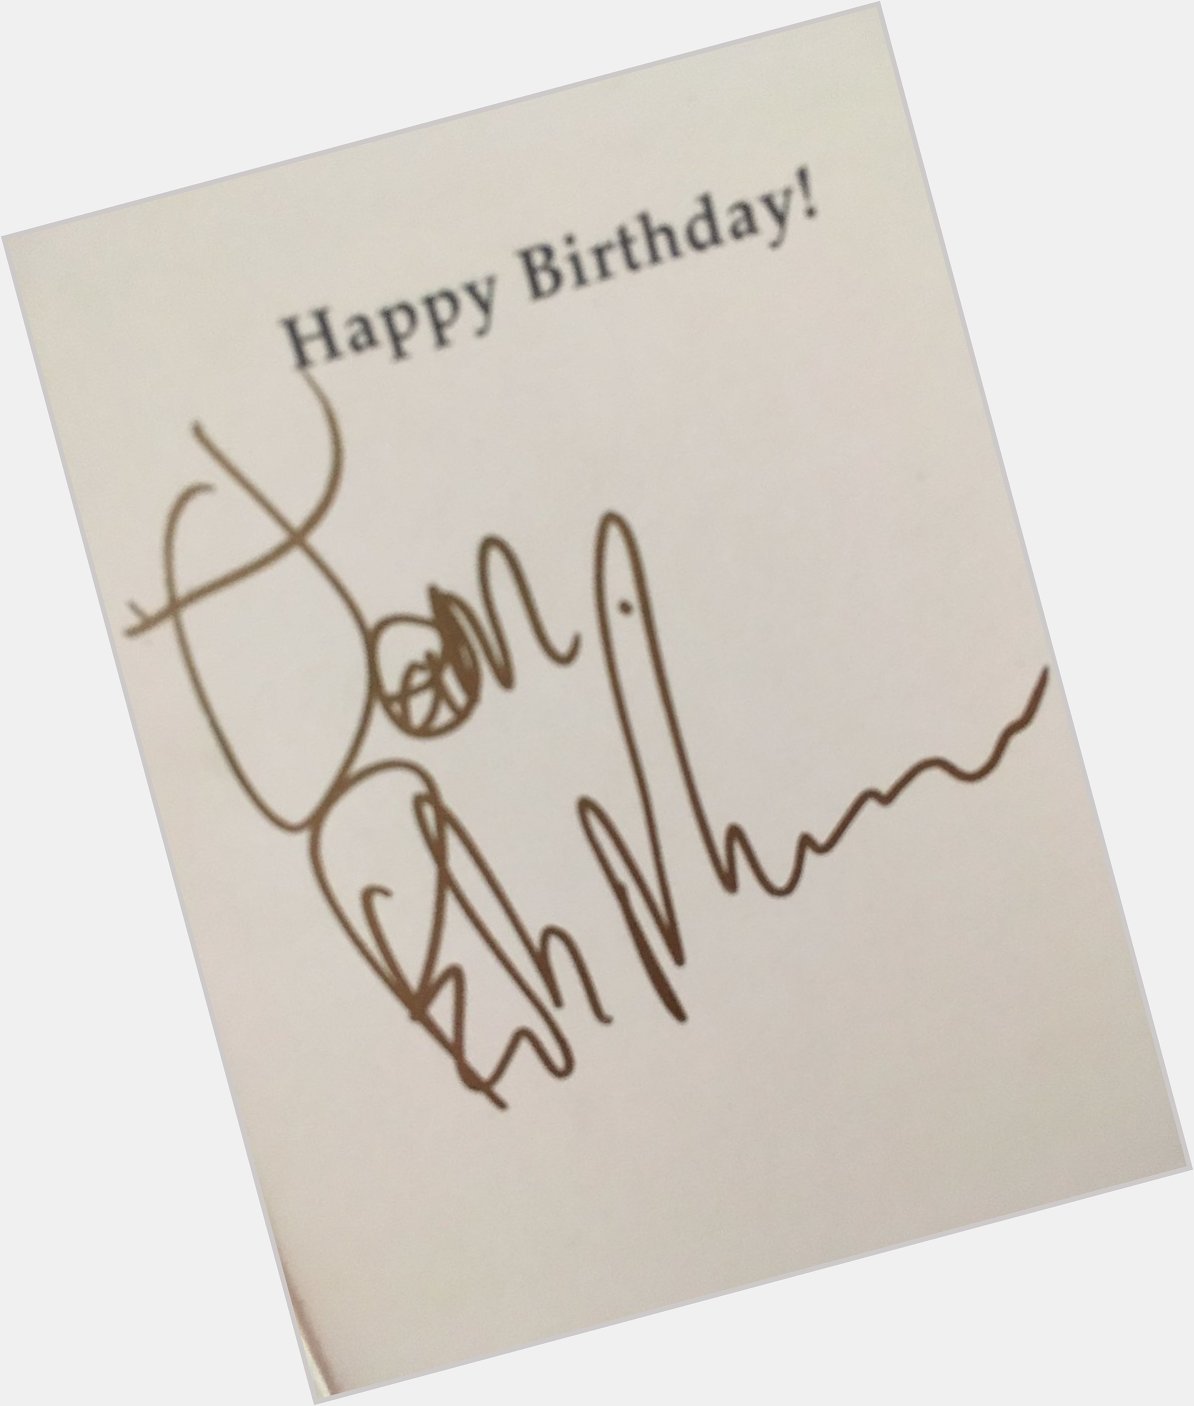 Bob Mortimer unwittingly wished me a happy birthday thanks to my wonderful Have a sniff of it: 